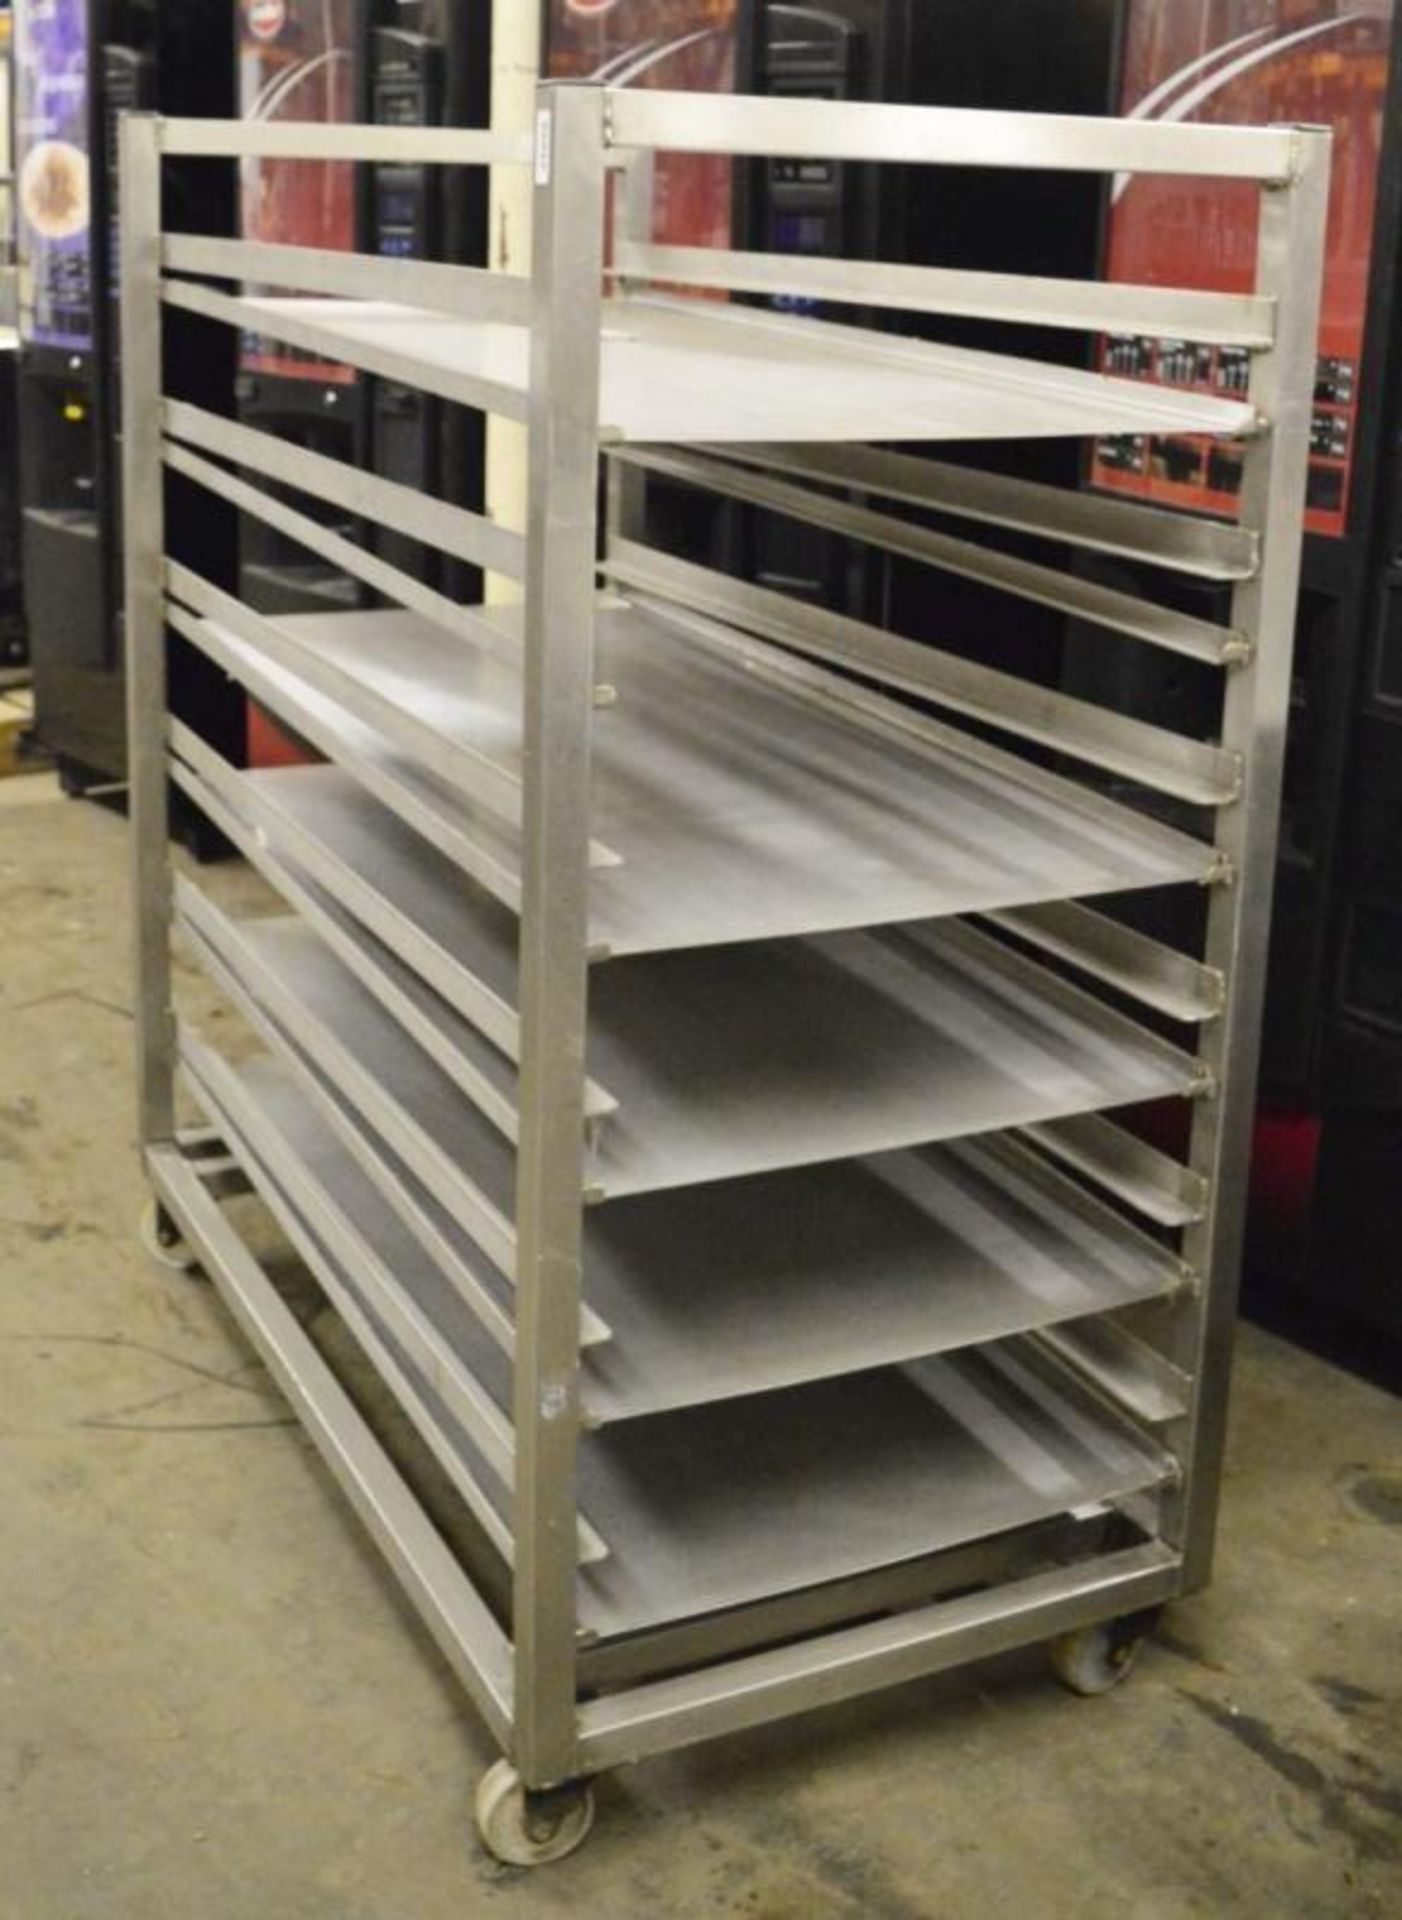 1 x Six Tier Commercial Kitchen Tray Trolley For Baking, Pastries and Other Foods - H148 x W70 x D13 - Image 3 of 3